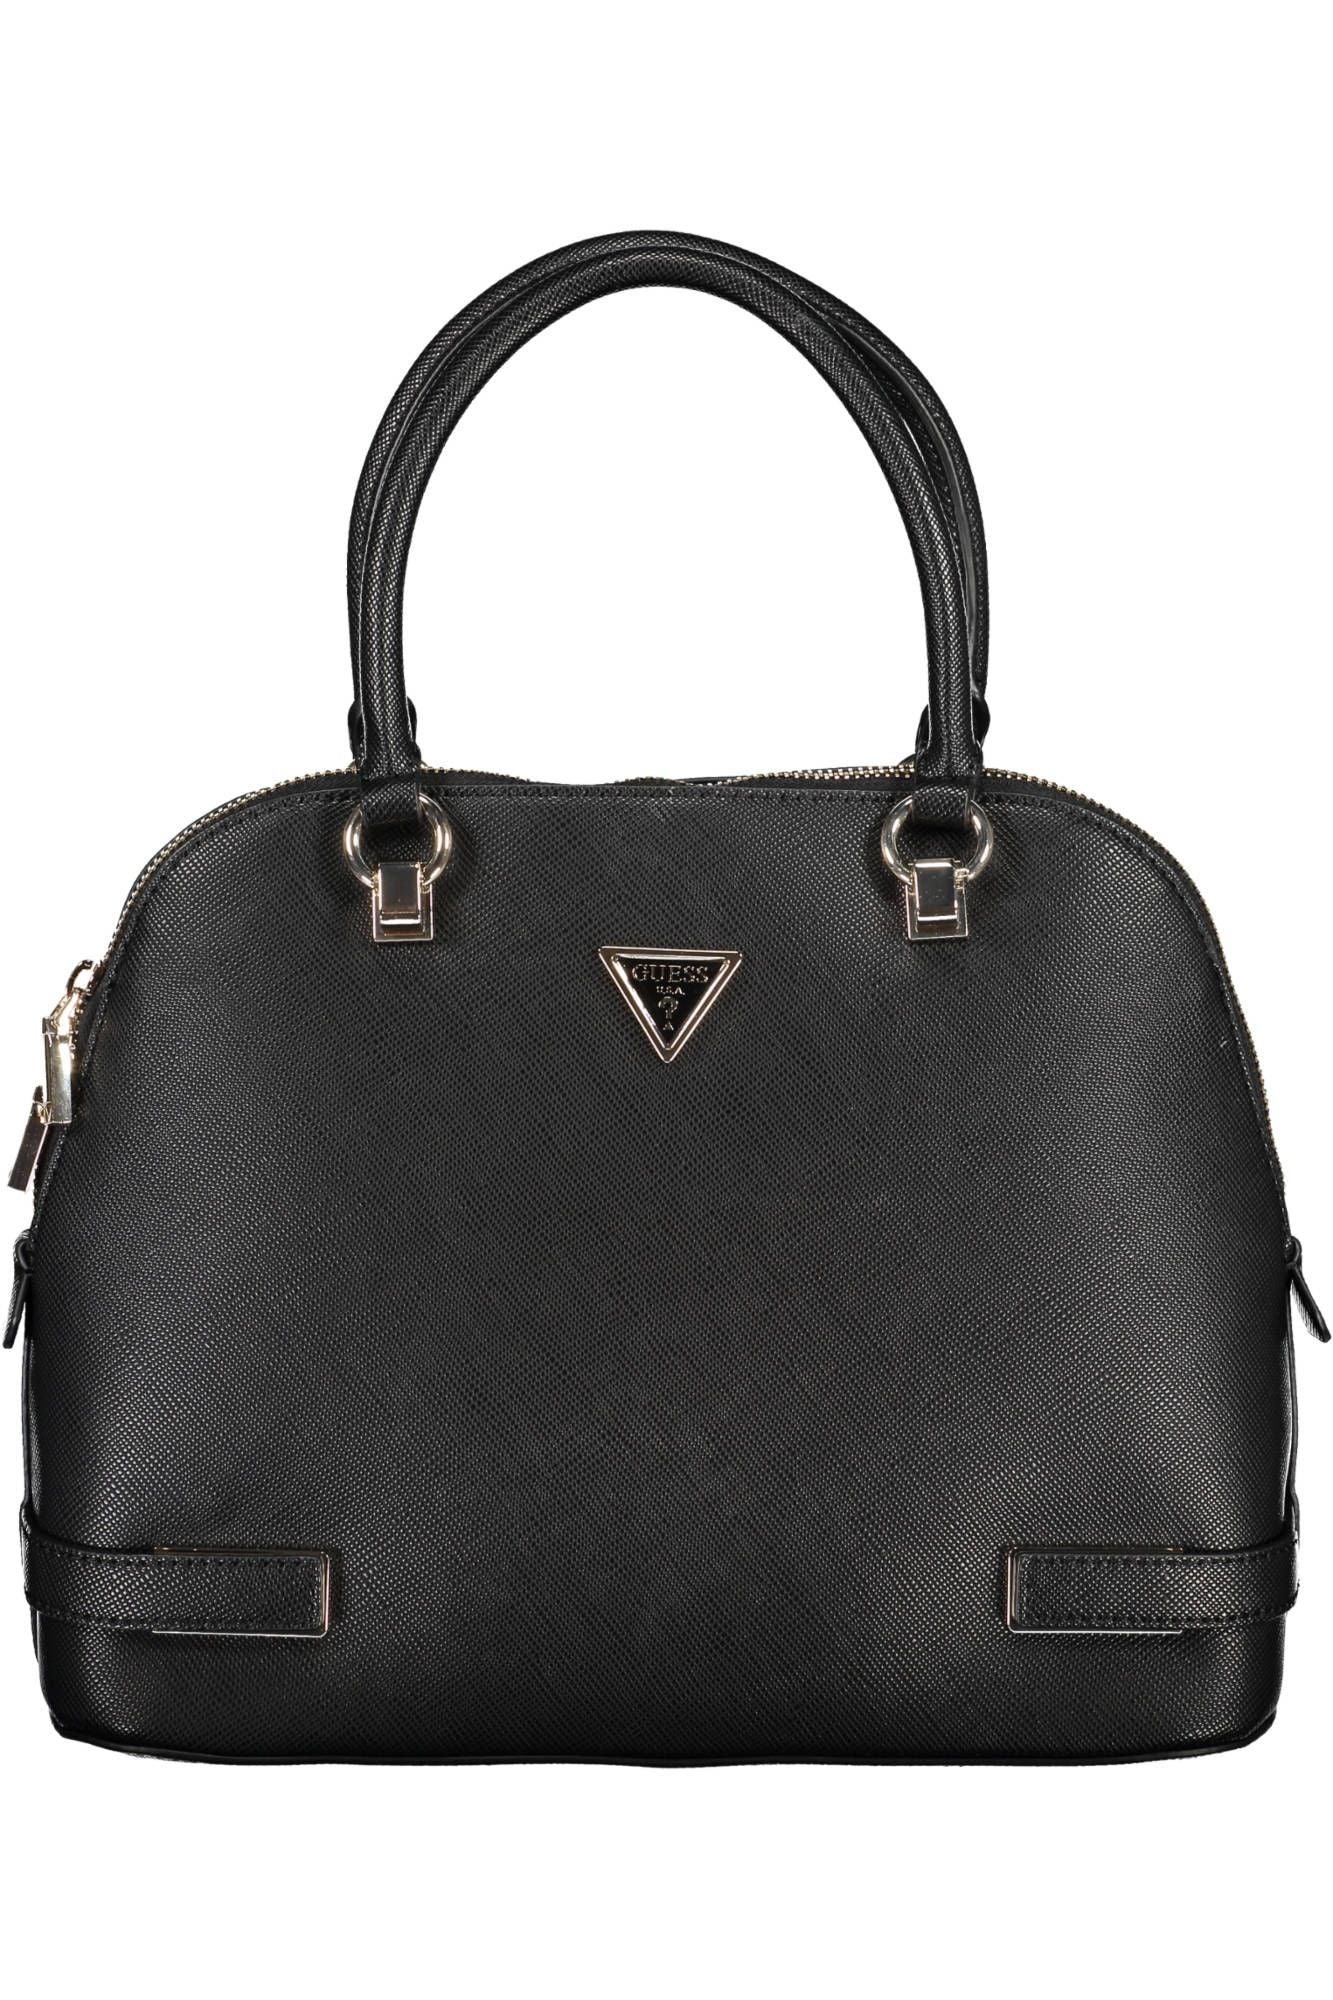 Guess Jeans Chic Black Guess Handbag with Contrasting Details - PER.FASHION